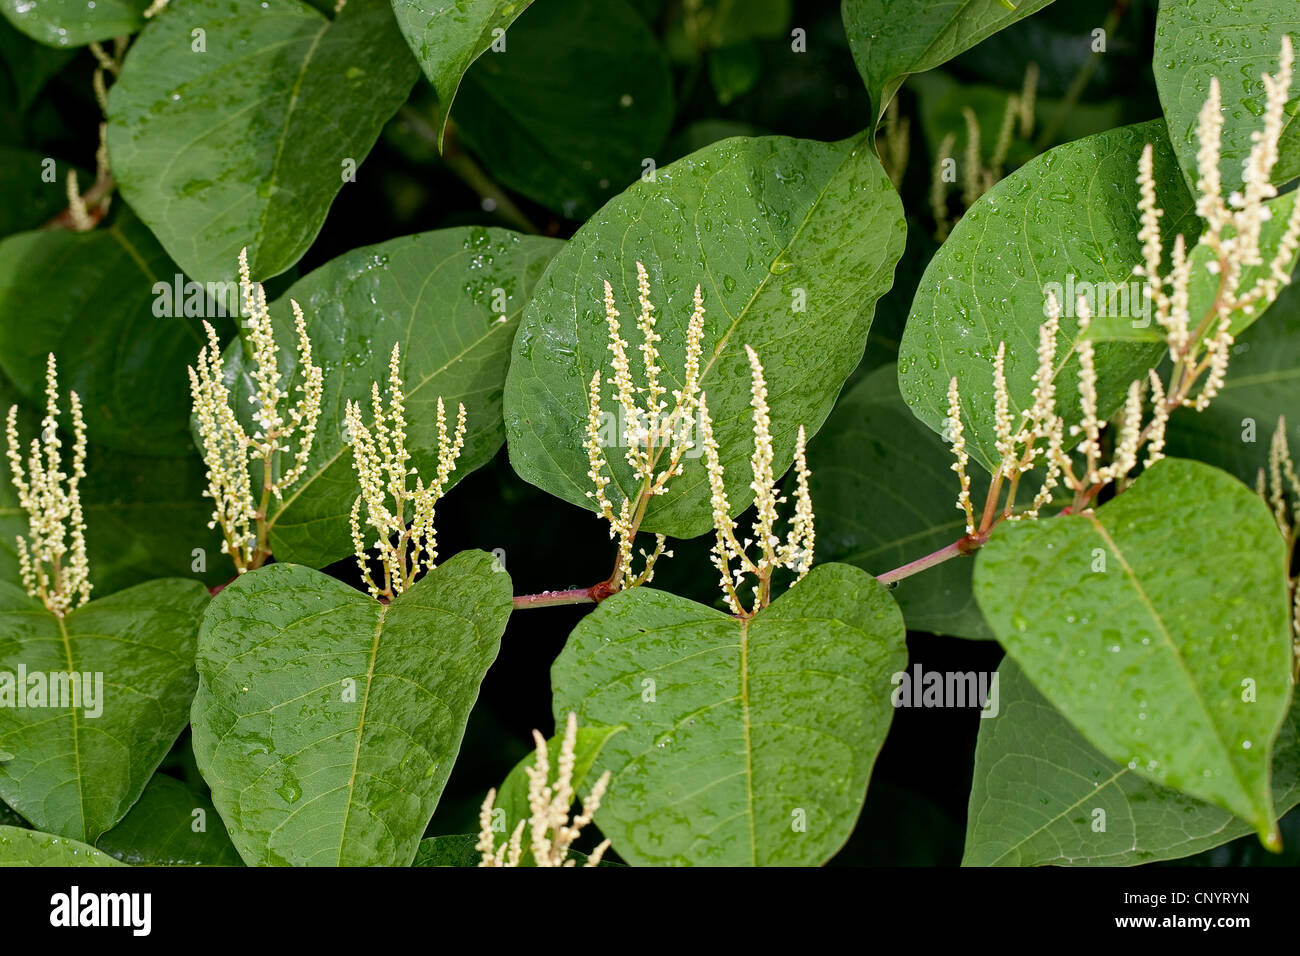 Japanese Knotweed (Fallopia japonica, Reynoutria japonica), blooming, Germany Stock Photo